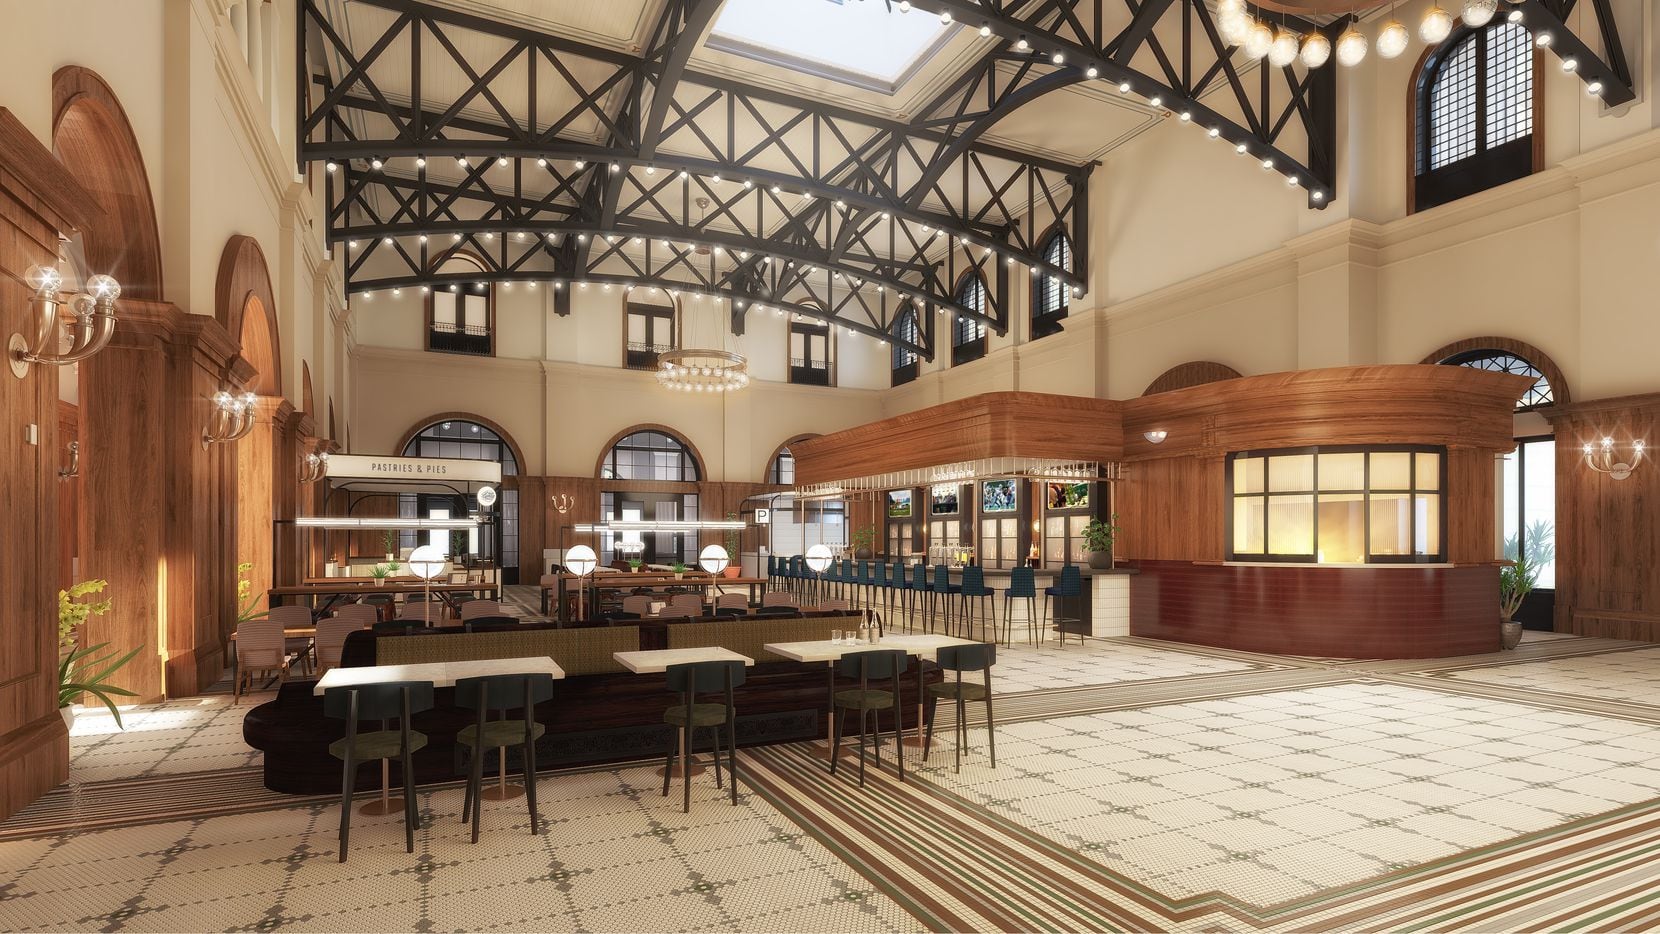 Grapevine S Coming Soon Hotel Vin Will Have A Food Hall